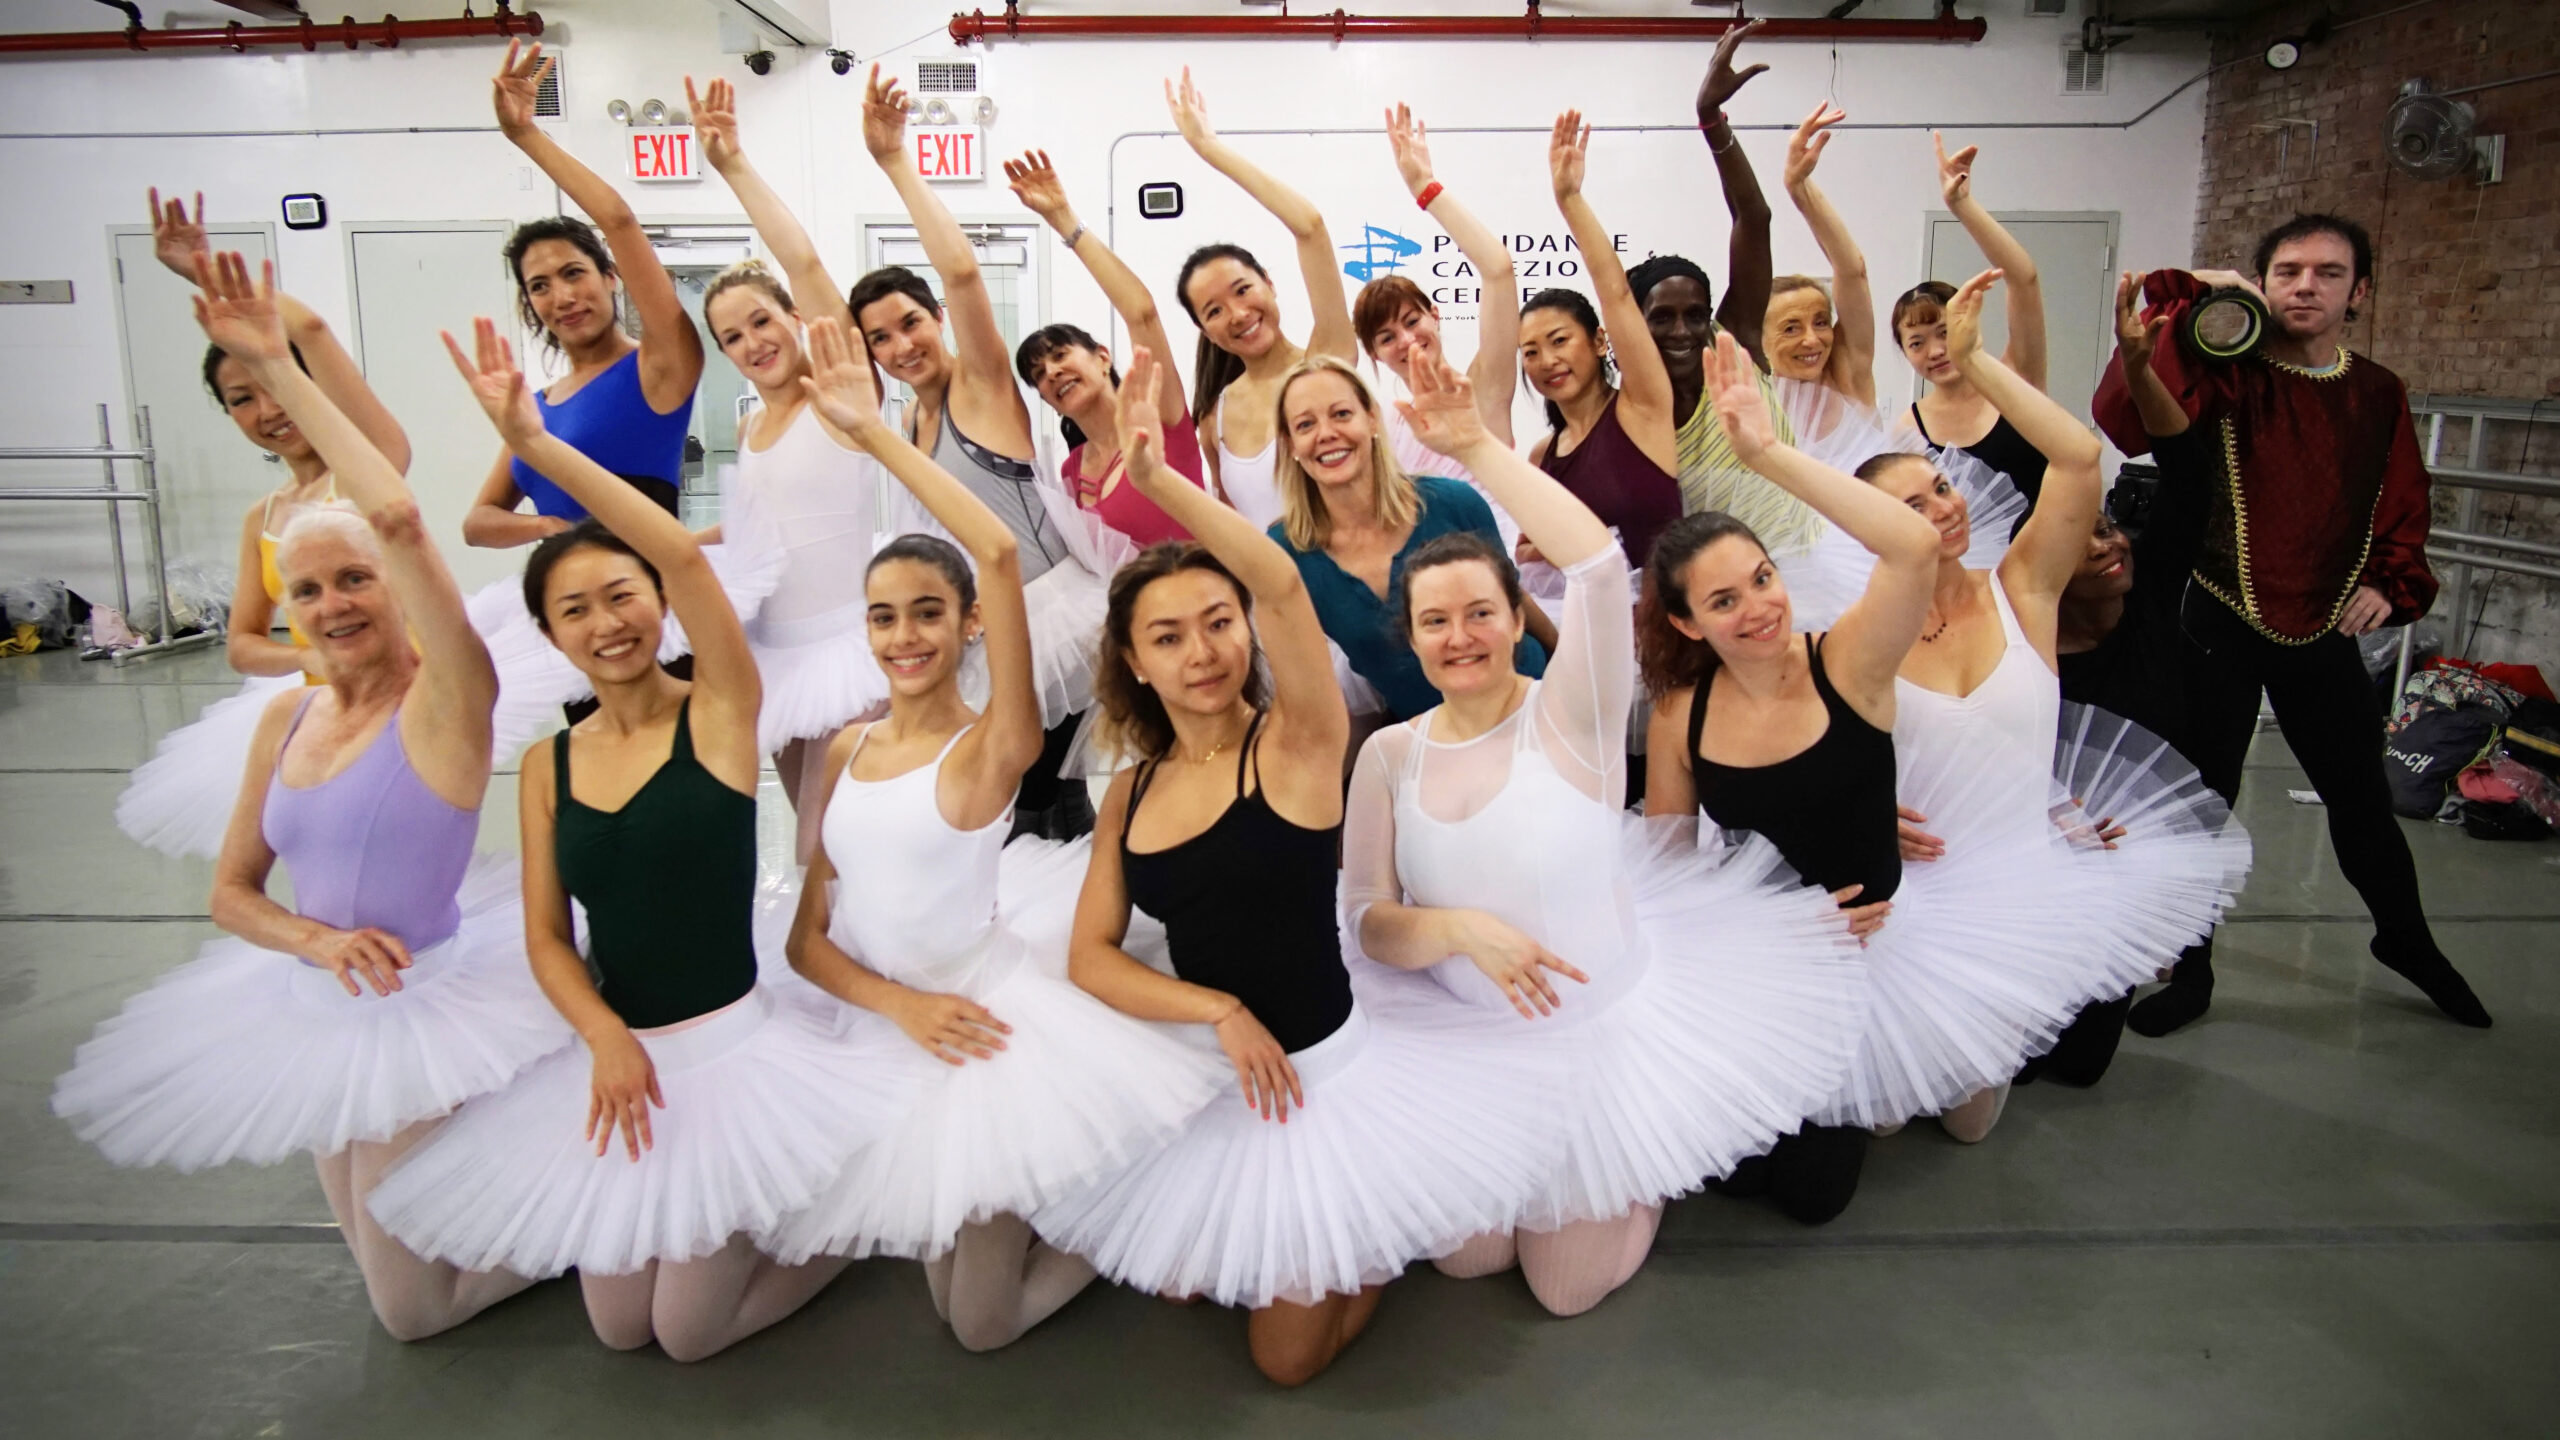 A large group of adult ballet dancers wearing leotards in various colors and white practice tutus pose closely together with their left arm raised next to their ear, the elbow slightly bent and the palm facing out. Their right arms are bent at the waist, crossing in front of their bodies. Seven of the dancers kneel in the front row, while the others stand. An adult male dancer stands at the far left of the group, posing in a tendu with his left hand on his hip as he holds a foam roller on his right shoulder.